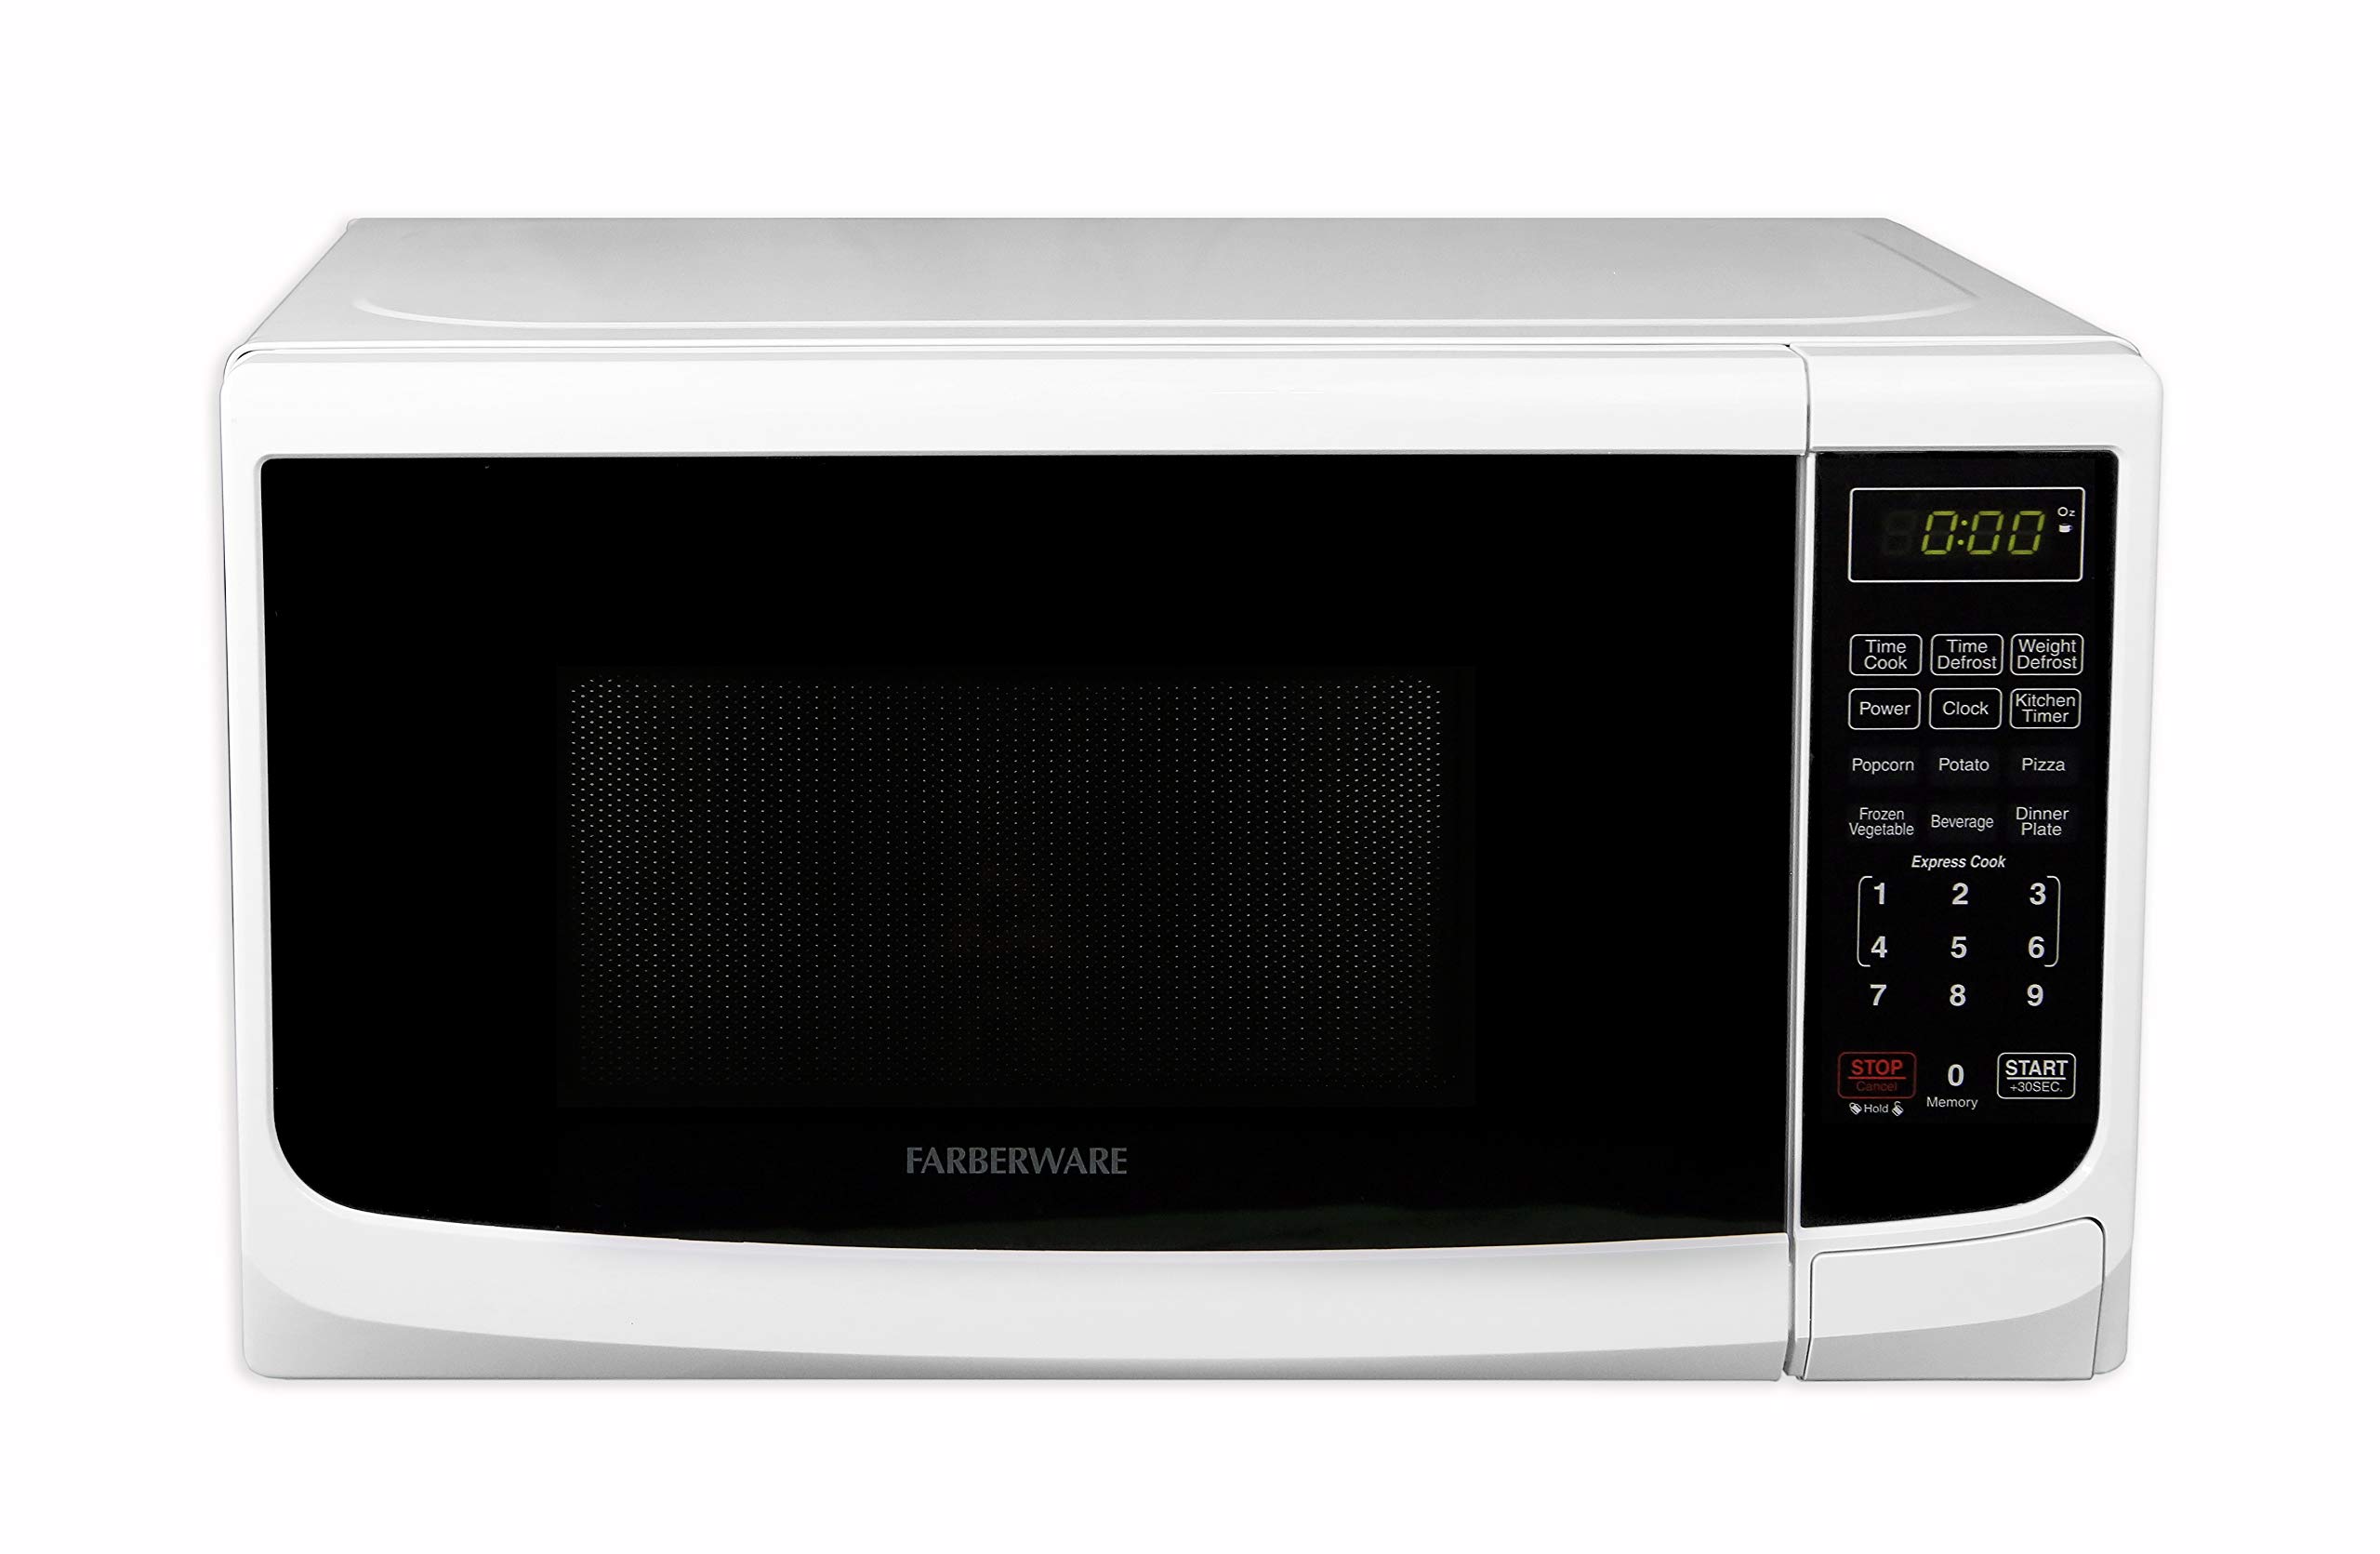 Farberware Countertop Microwave 700 Watts, 0.7 cu ft - Microwave Oven With LED Lighting and Child Lock - Perfect for Apartments and Dorms - Easy Clean Grey Interior, Retro White